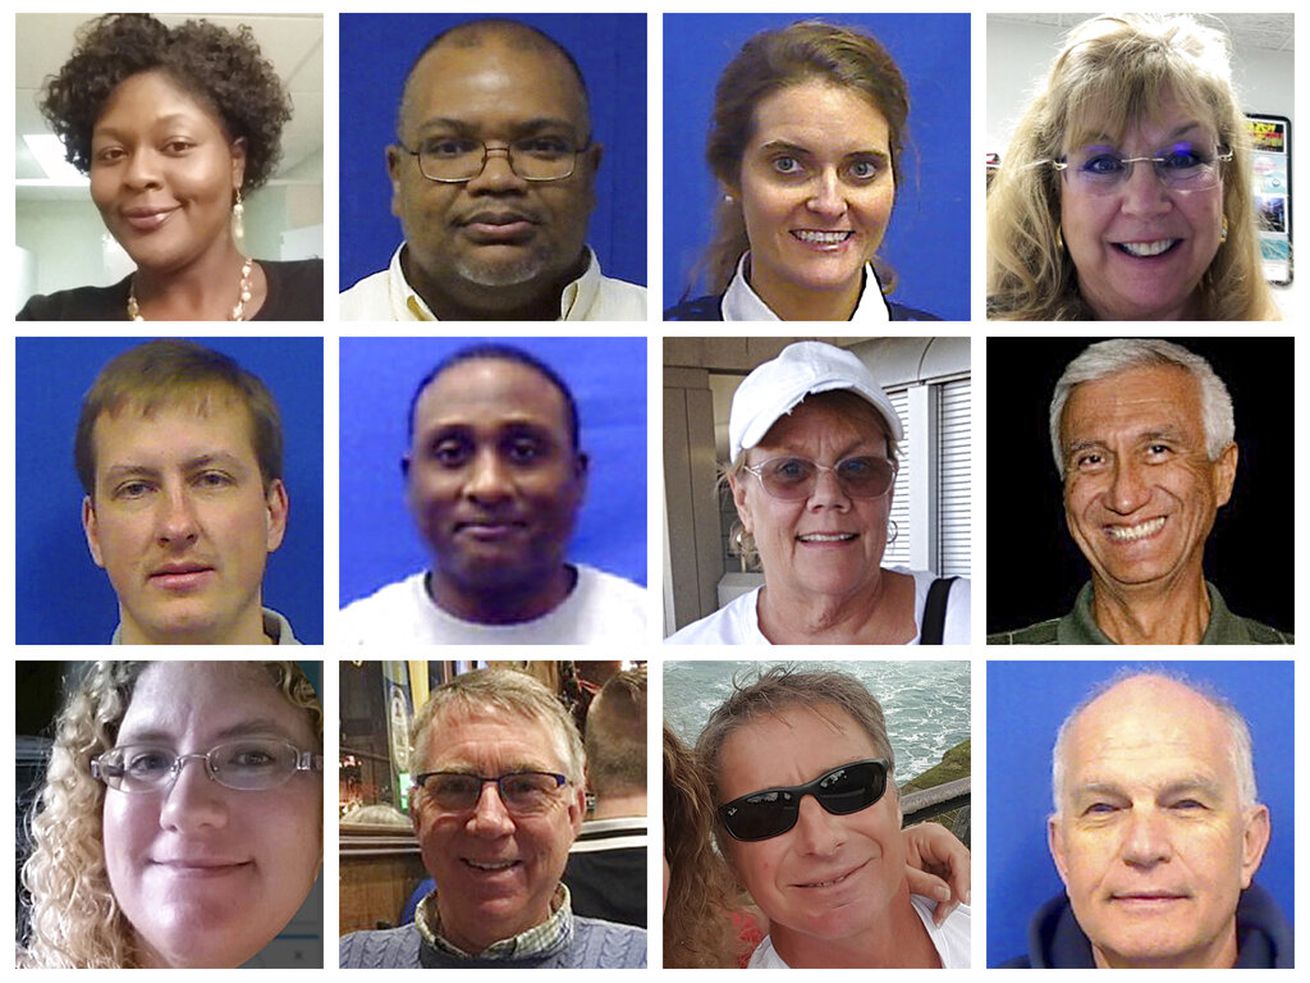 This combination of photos provided by the City of Virginia Beach on Saturday, June 1, 2019 shows victims of Friday’s shooting at a municipal building in Virginia Beach, Va. Top row from left are Laquita C. Brown, Ryan Keith Cox, Tara Welch Gallagher and Mary Louise Gayle. Middle row from left are Alexander Mikhail Gusev, Joshua O. Hardy, Michelle “Missy” Langer and Richard H. Nettleton. Bottom row from left are Katherine A. Nixon, Christopher Kelly Rapp, Herbert “Bert” Snelling and Robert “Bobby” Williams.